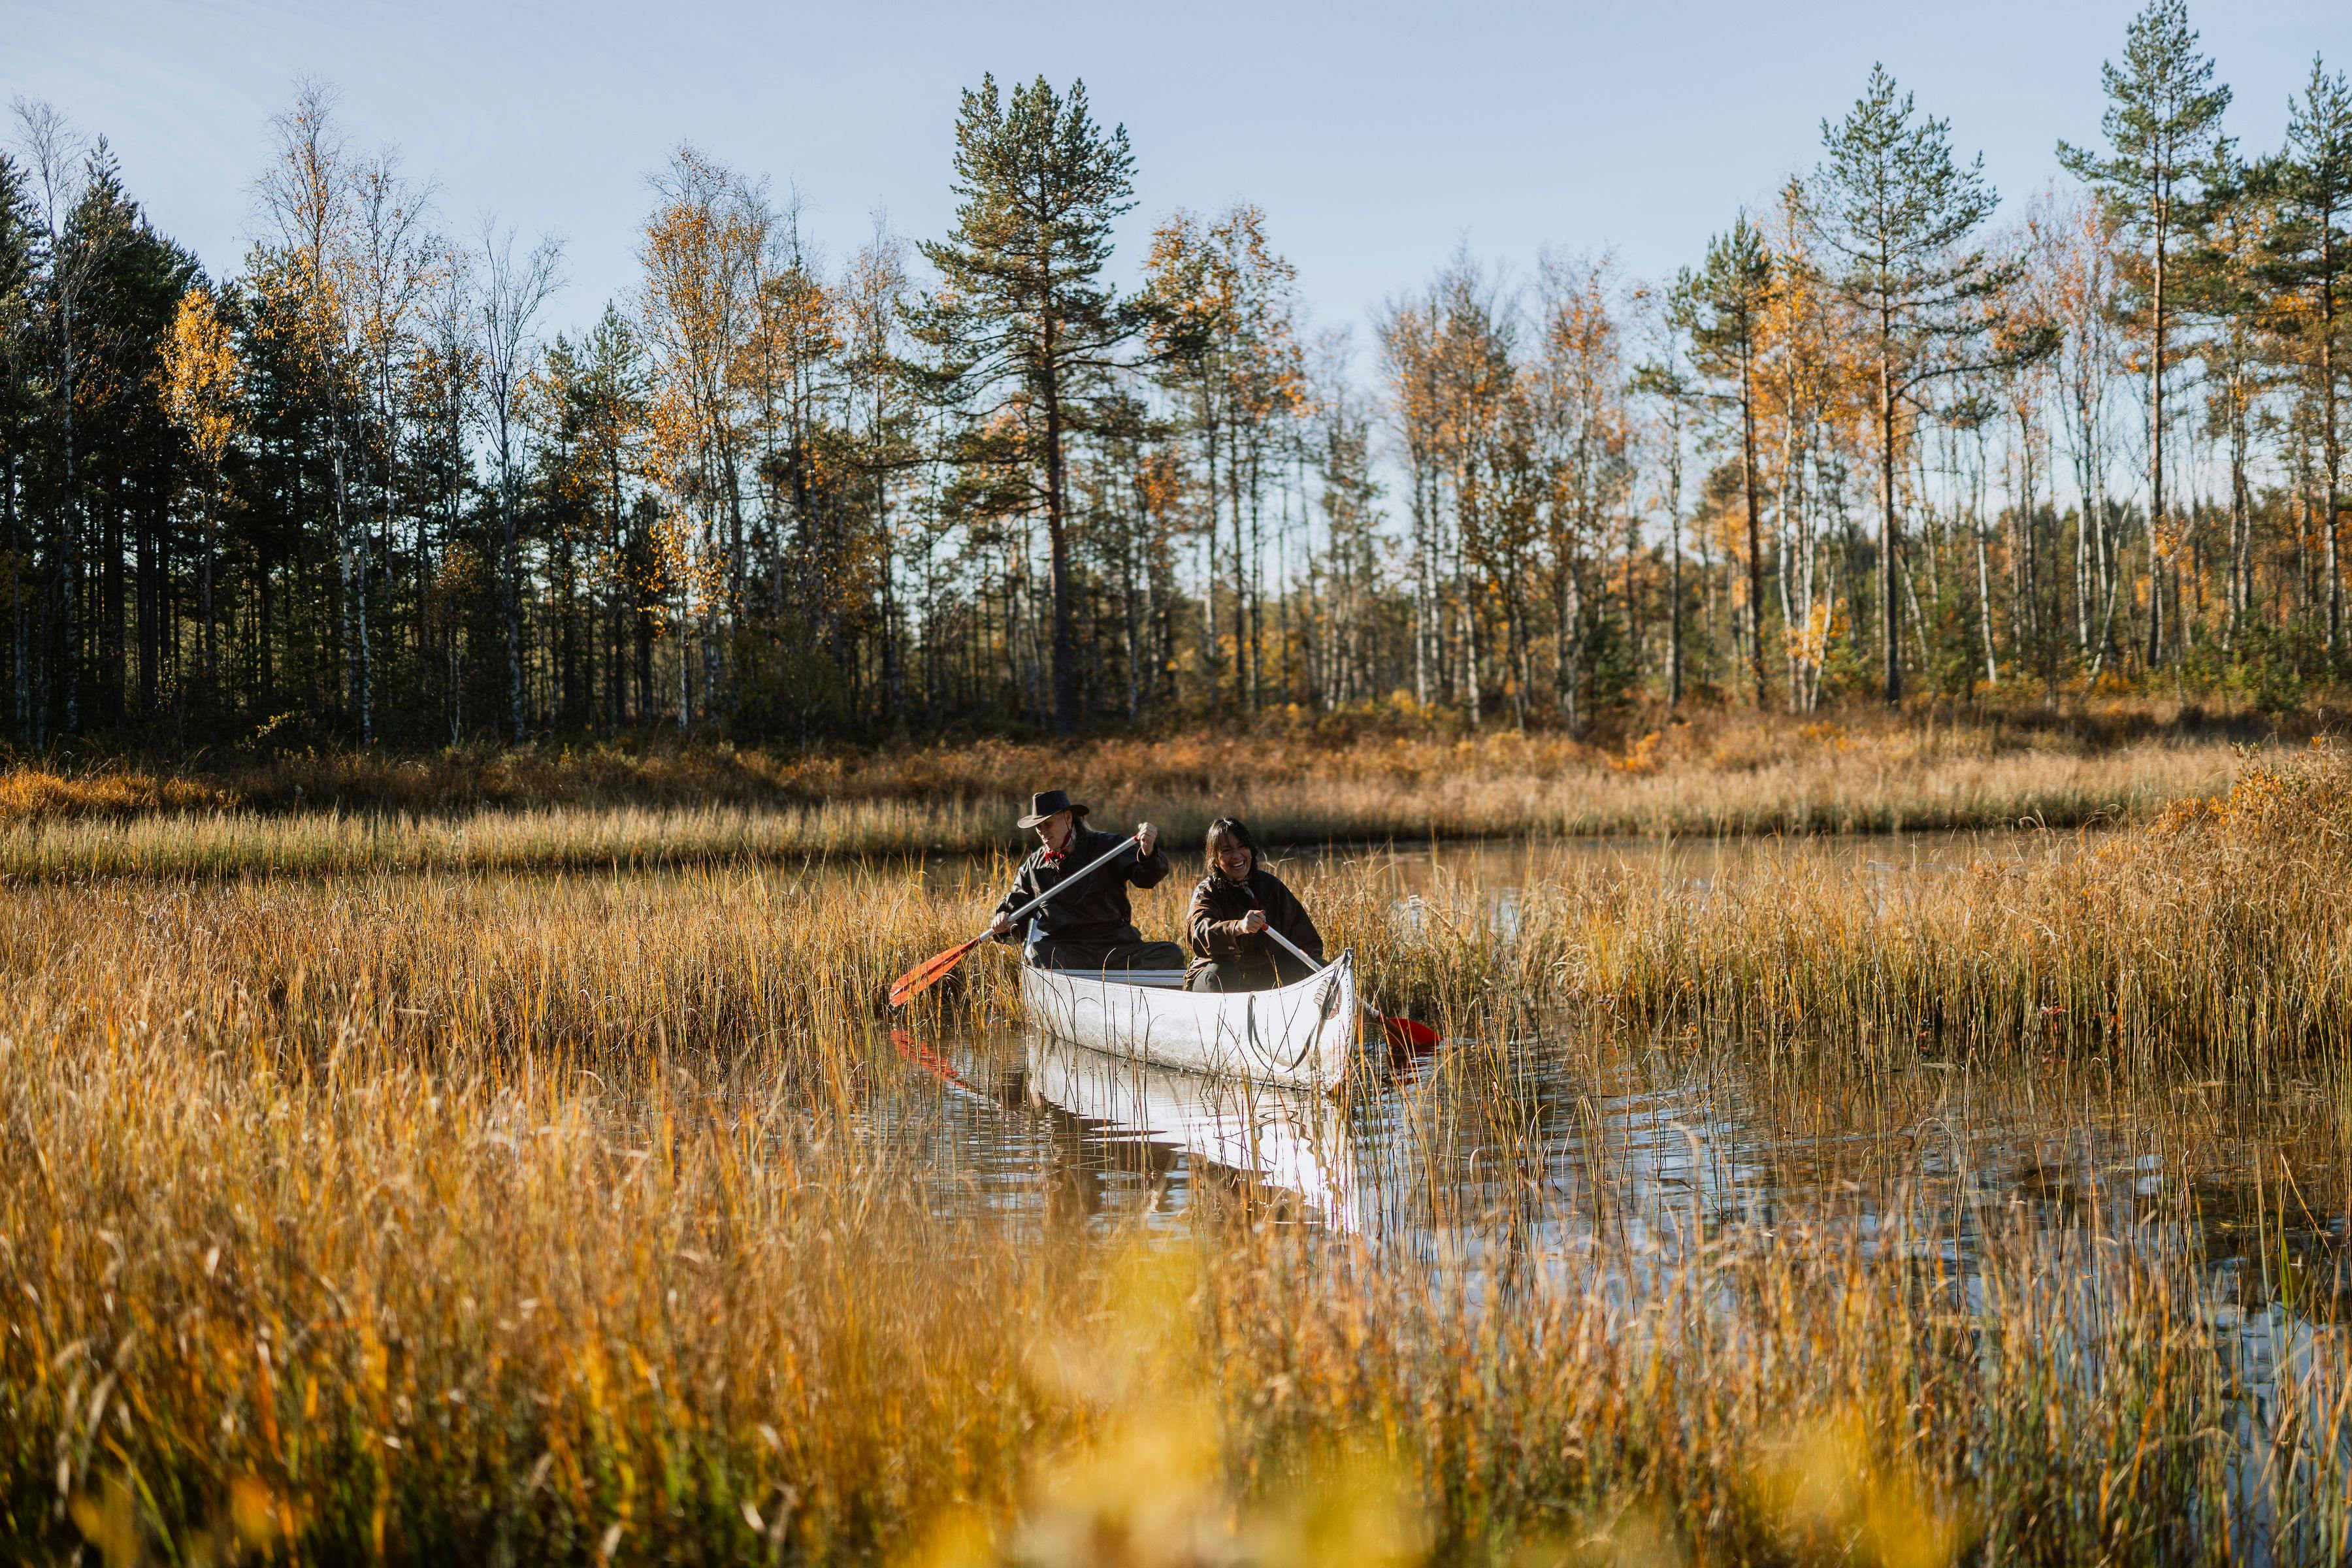 Two happy adventurers exploreing the swedish wilderness by canoe on a calm river.